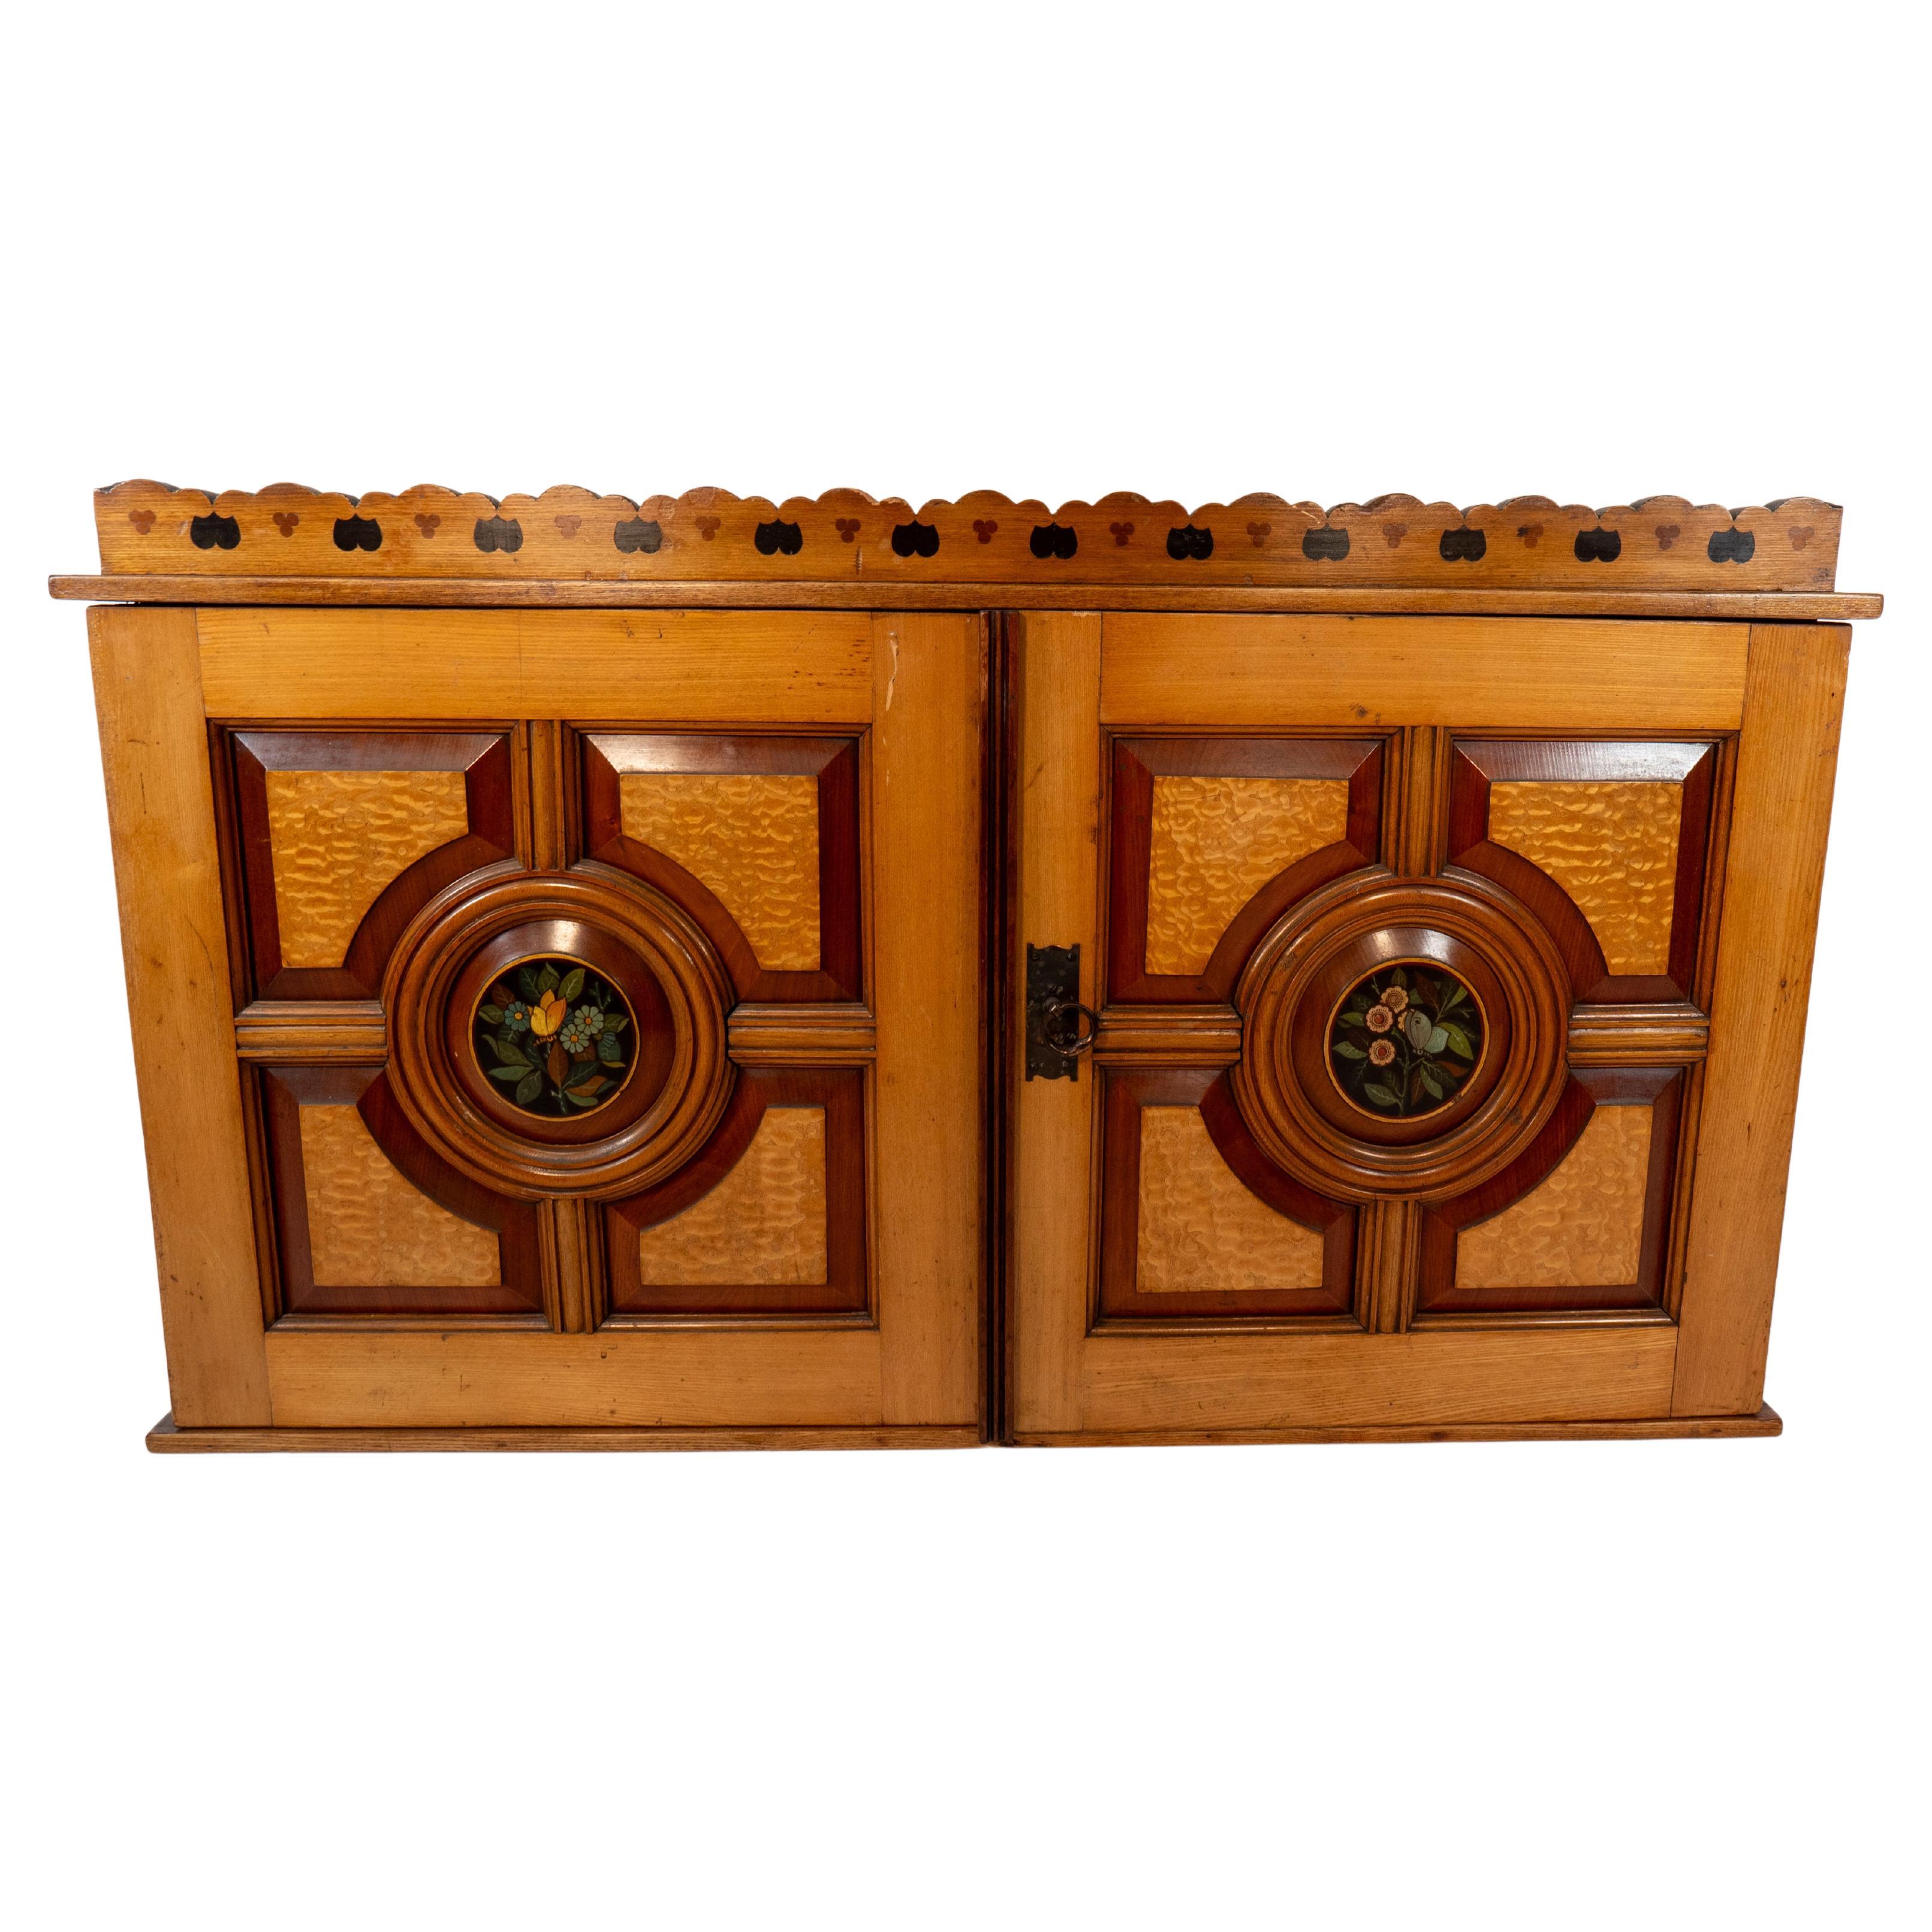 Aesthetic Movement Ash & fiddle back Ash wall cabinet inlaid with floral panels. For Sale